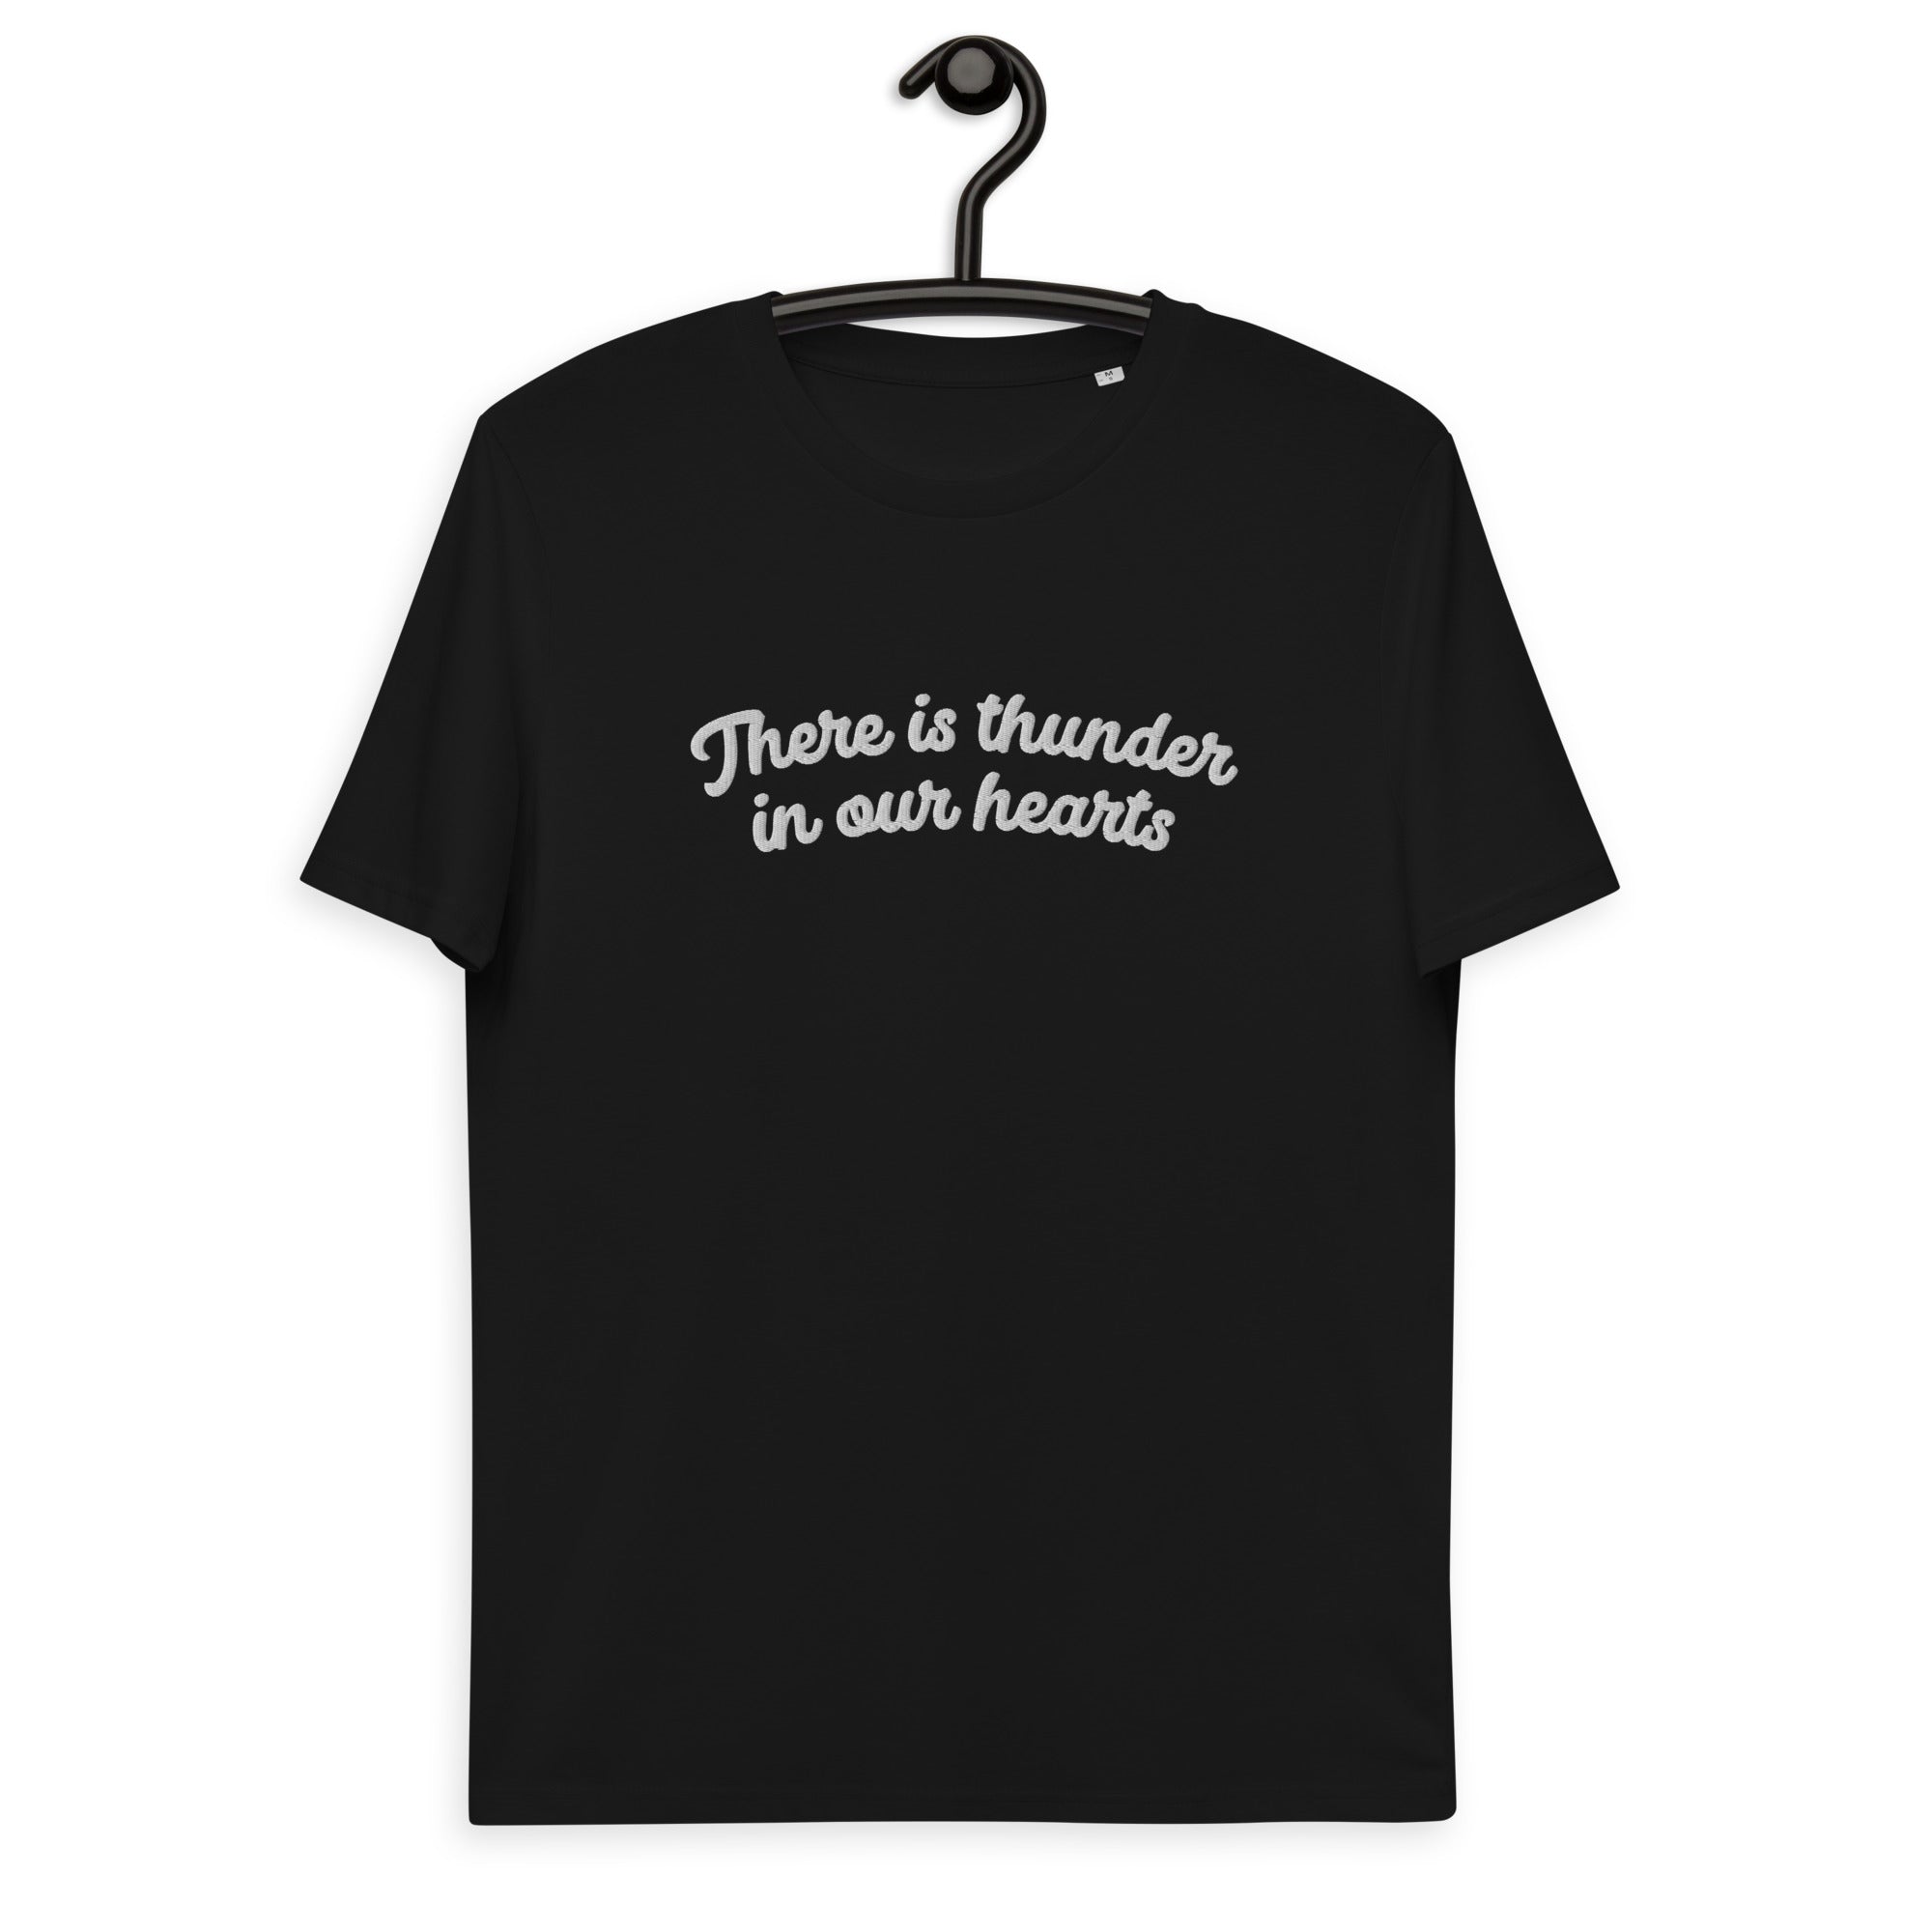 THERE IS THUNDER IN OUR HEARTS Embroidered Unisex organic cotton t-shirt - white text